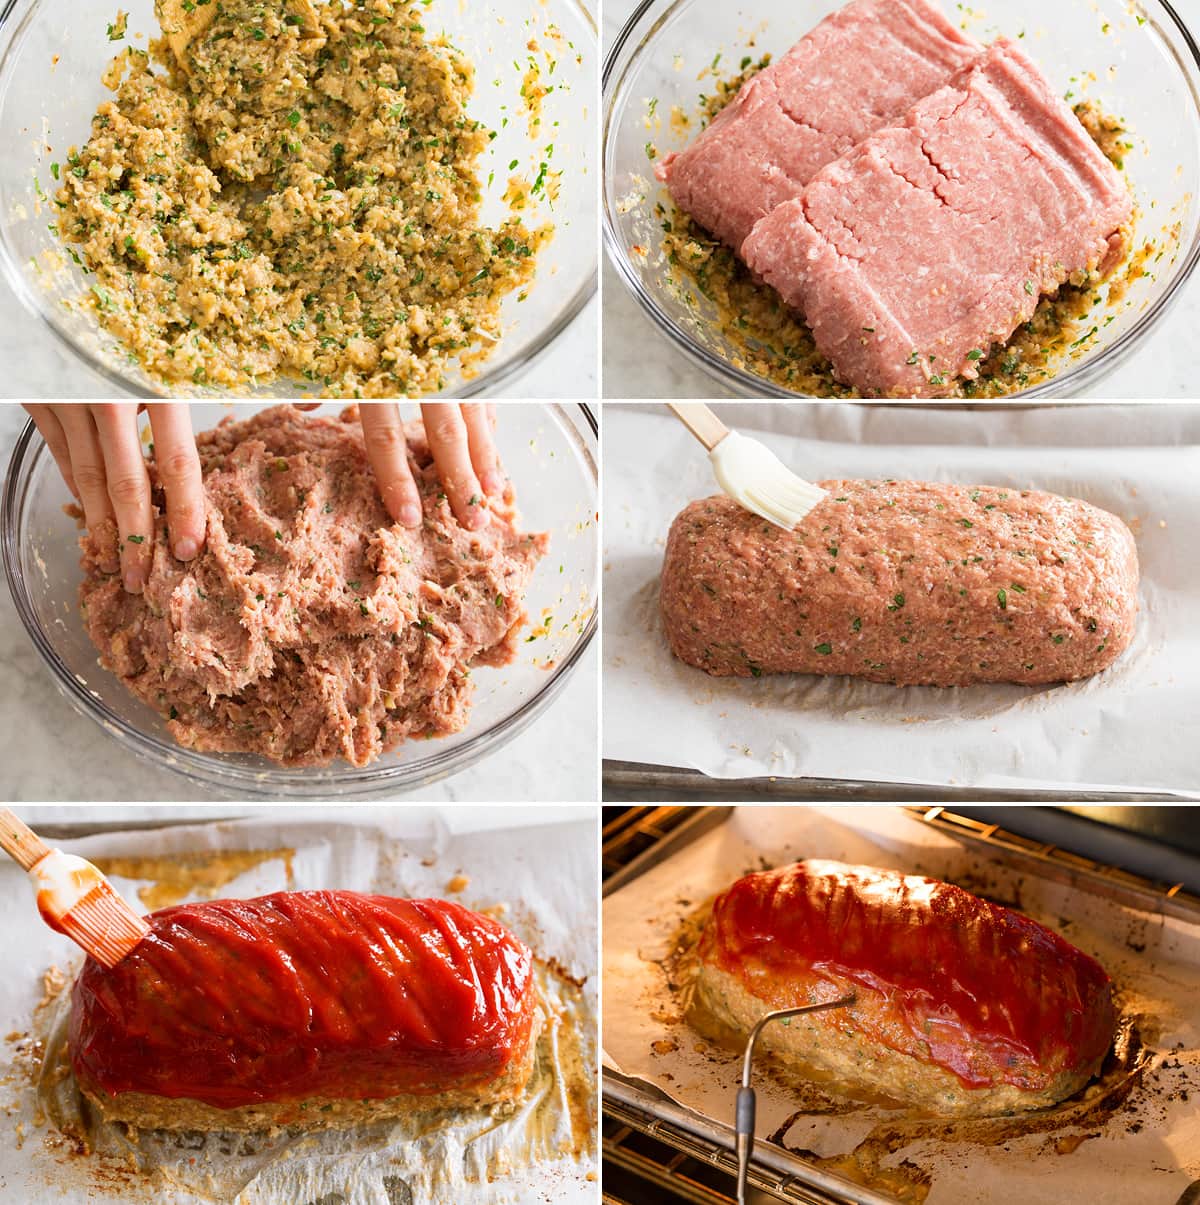 Collage of six images showing remaining six steps to making turkey meatloaf. Includes egg and onion mixture shown after mixing in a mixing bowl, adding turkey. Then shows mixed meatloaf mixture, shaped meatloaf mixture, ketchup coated meatloaf. And last includes image of meatloaf baking in the oven on baking sheet.